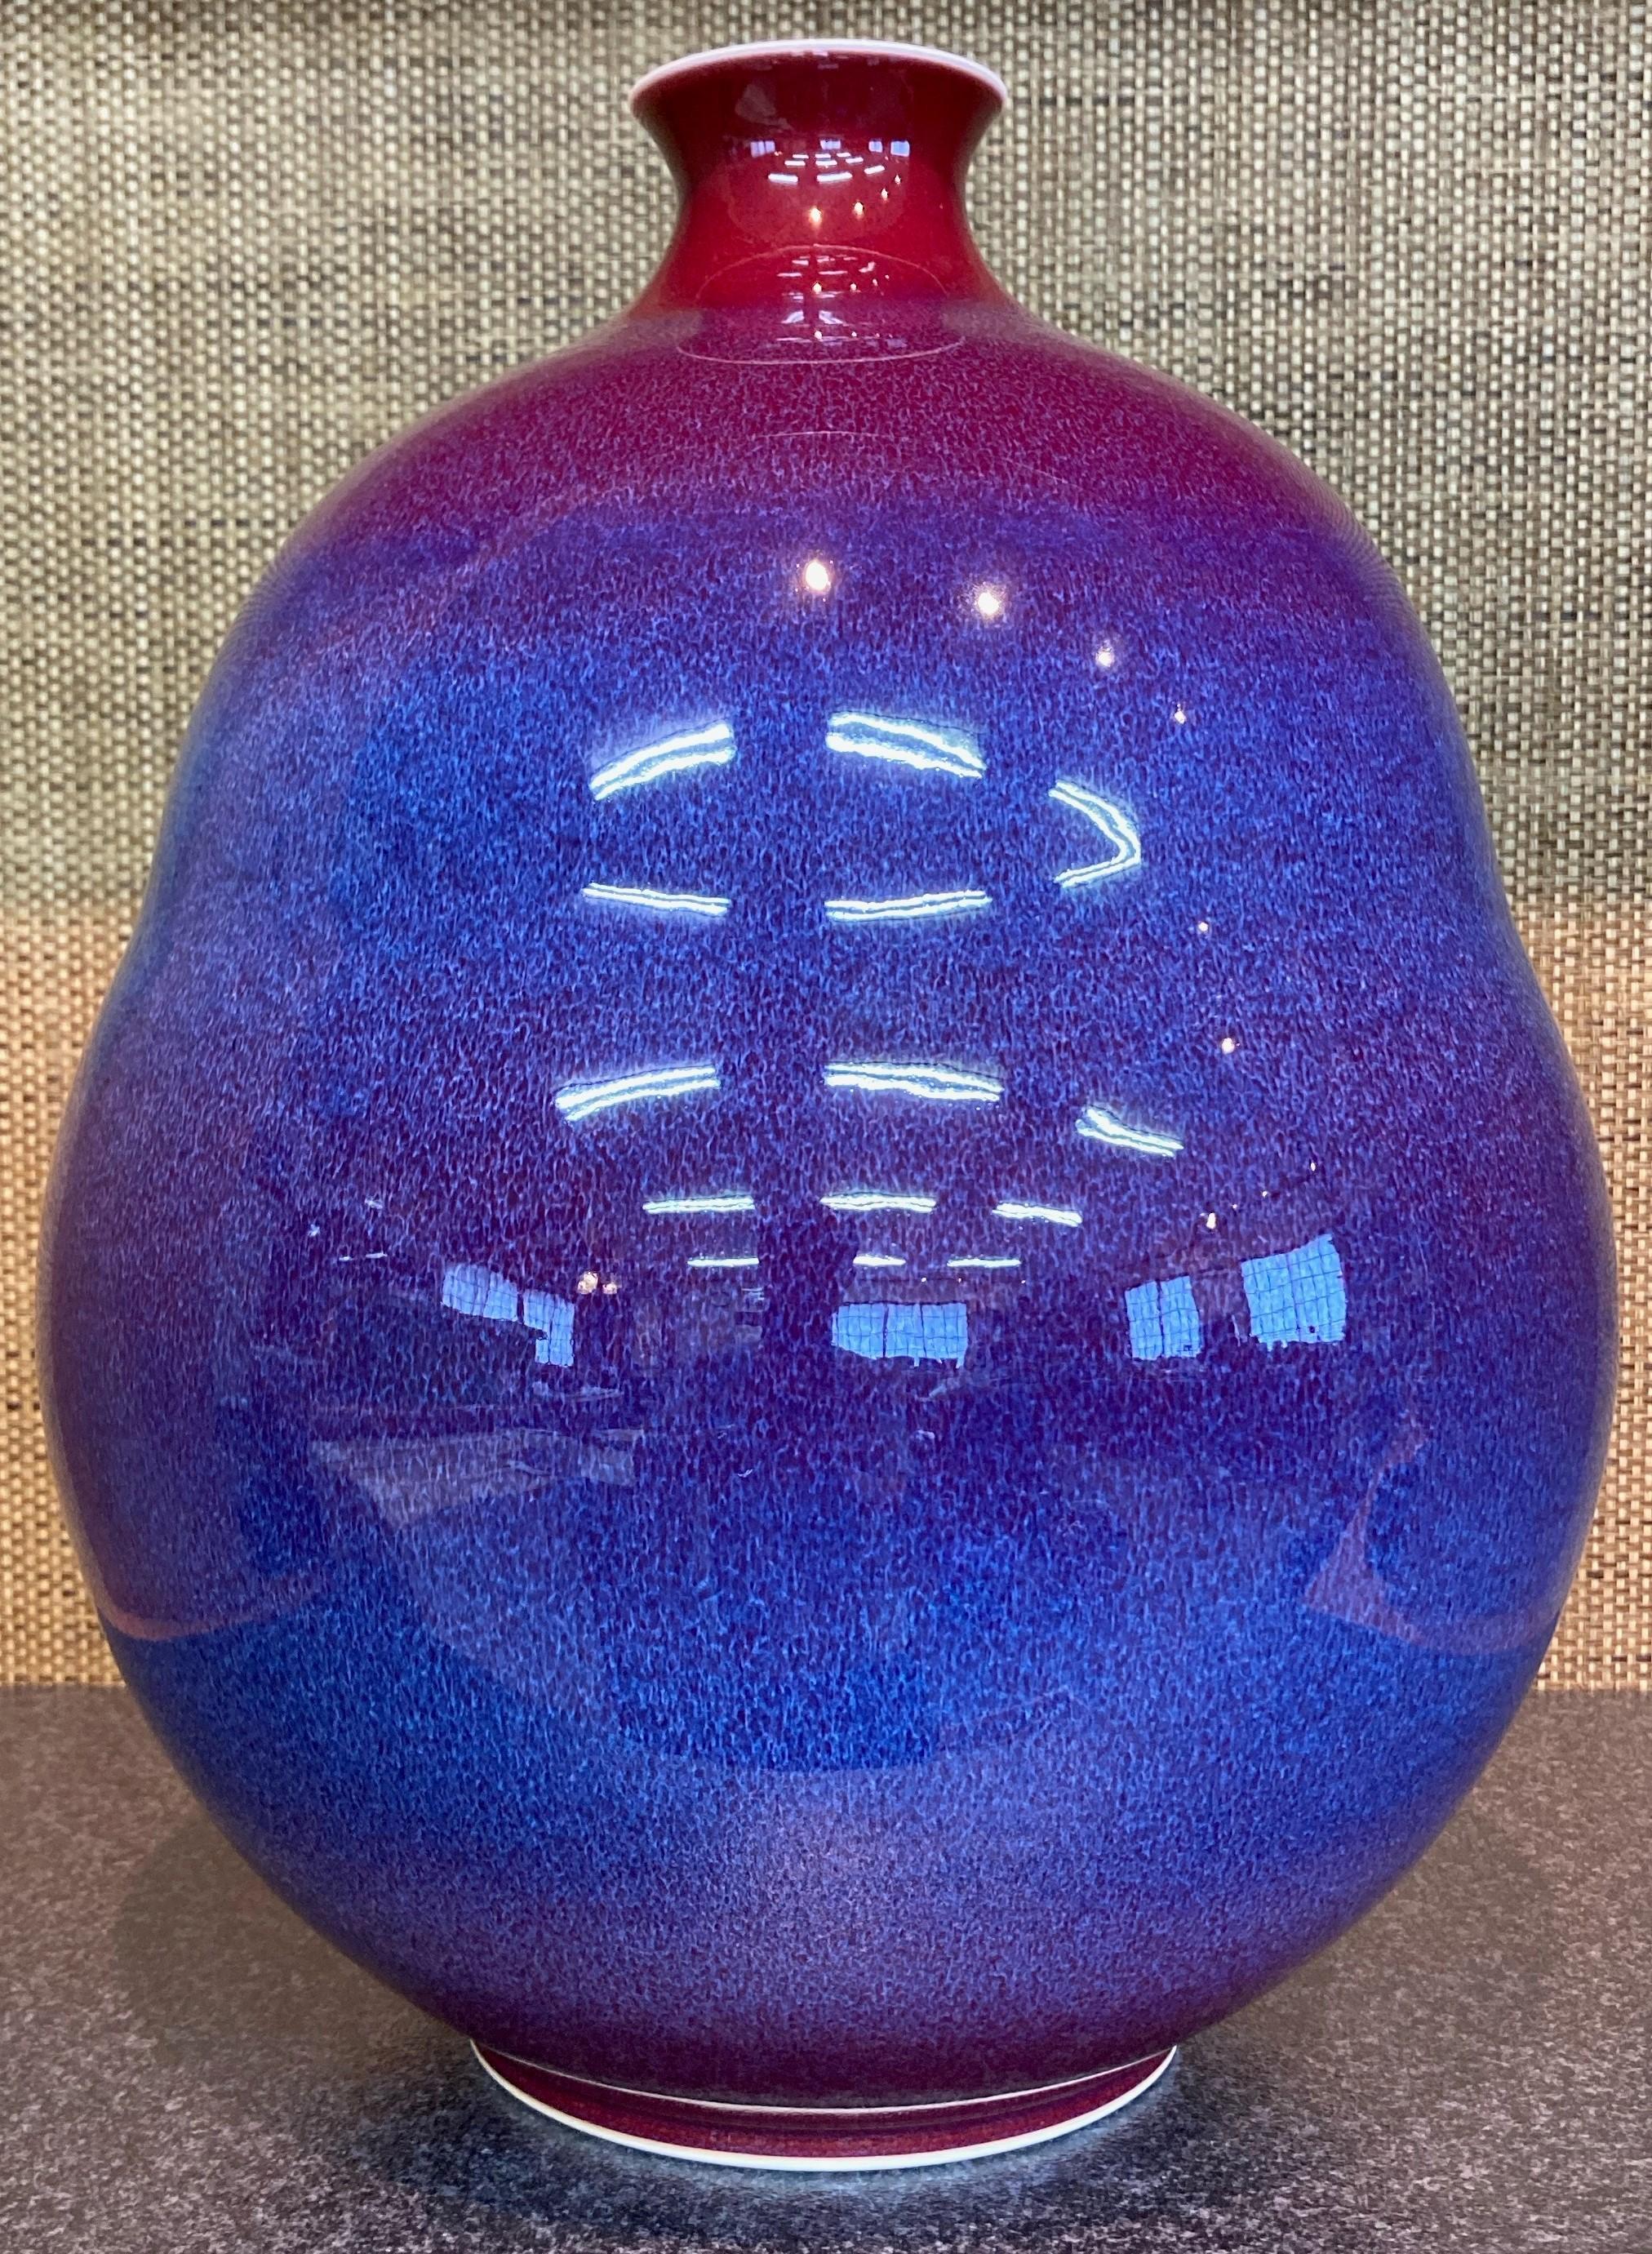 Japanese Contemporary Red and Blue Hand-Glazed Porcelain Vase by Master Artist For Sale 1